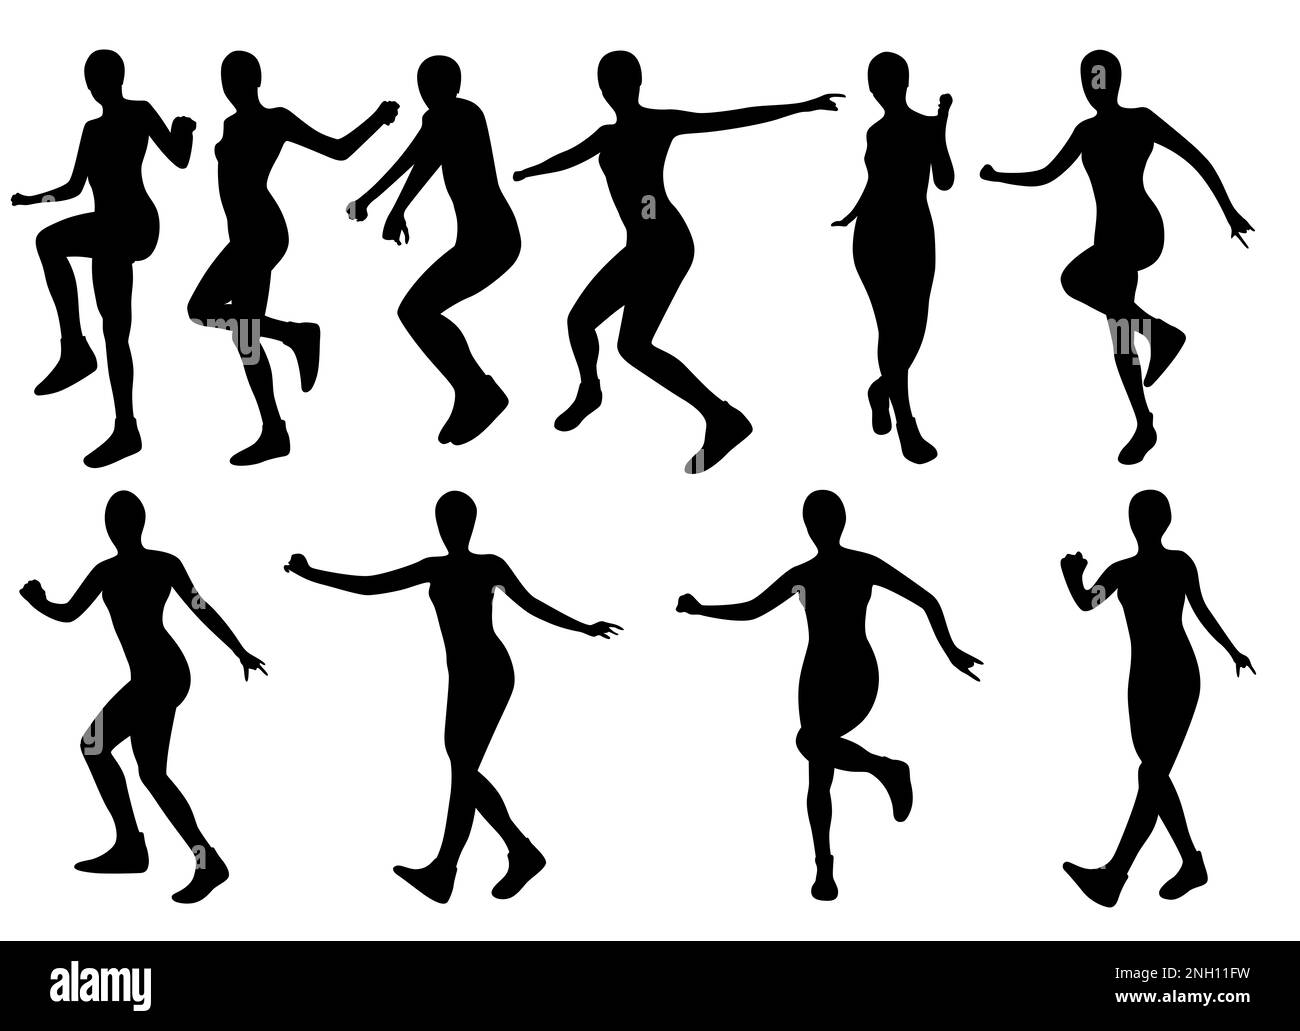 Tutorial steps to the shuffle dance. Clipping Path included for each silhouette. Stock Photo